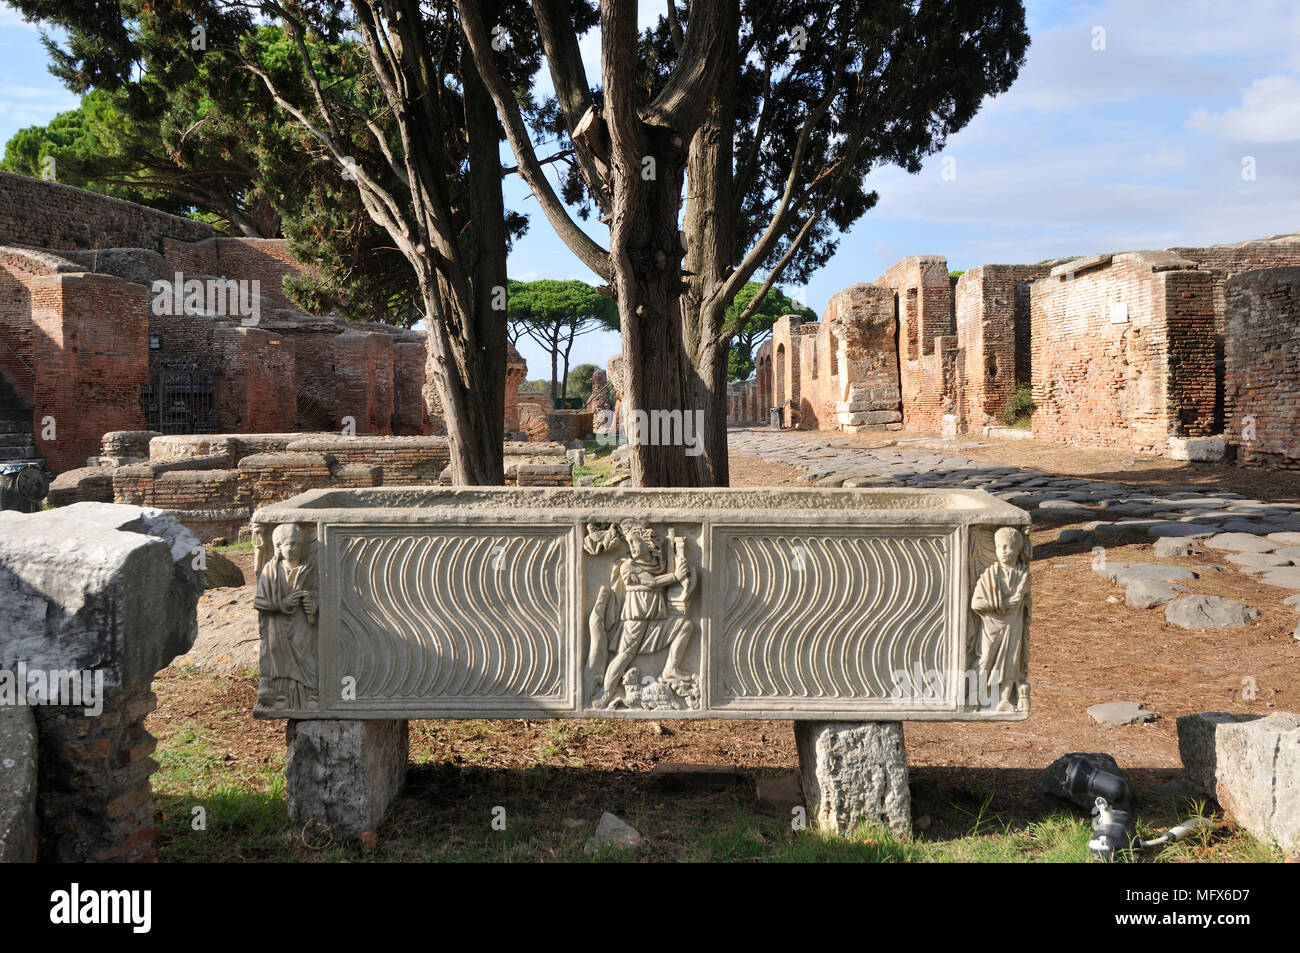 Roman tomb of Ostia Antica. At the mouth of the River Tiber, Ostia was Rome's seaport two thousand years ago. Italy Stock Photo